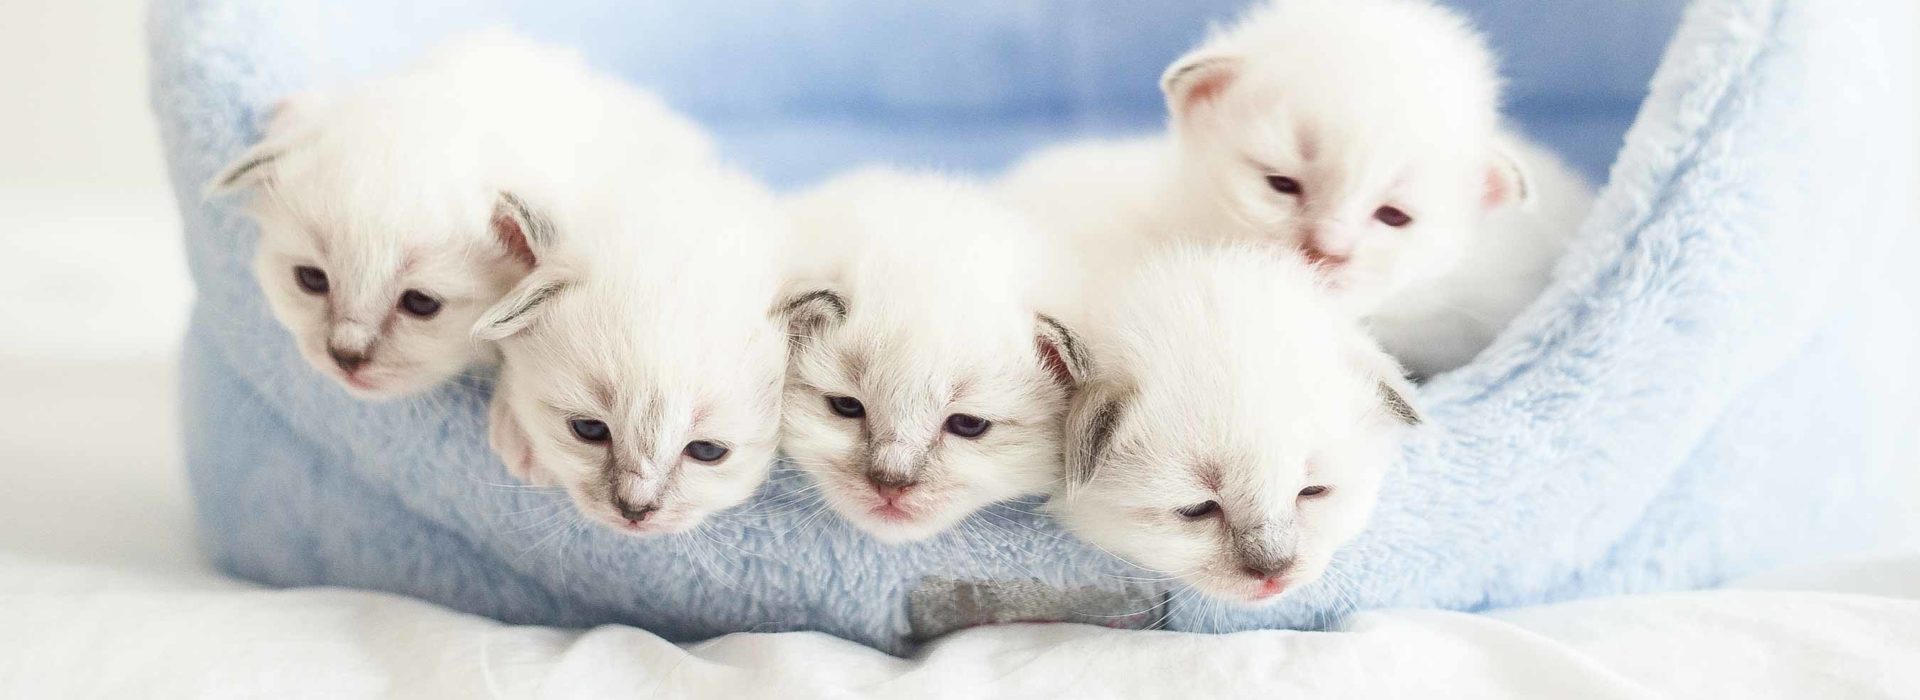 White kittens in a cat bed